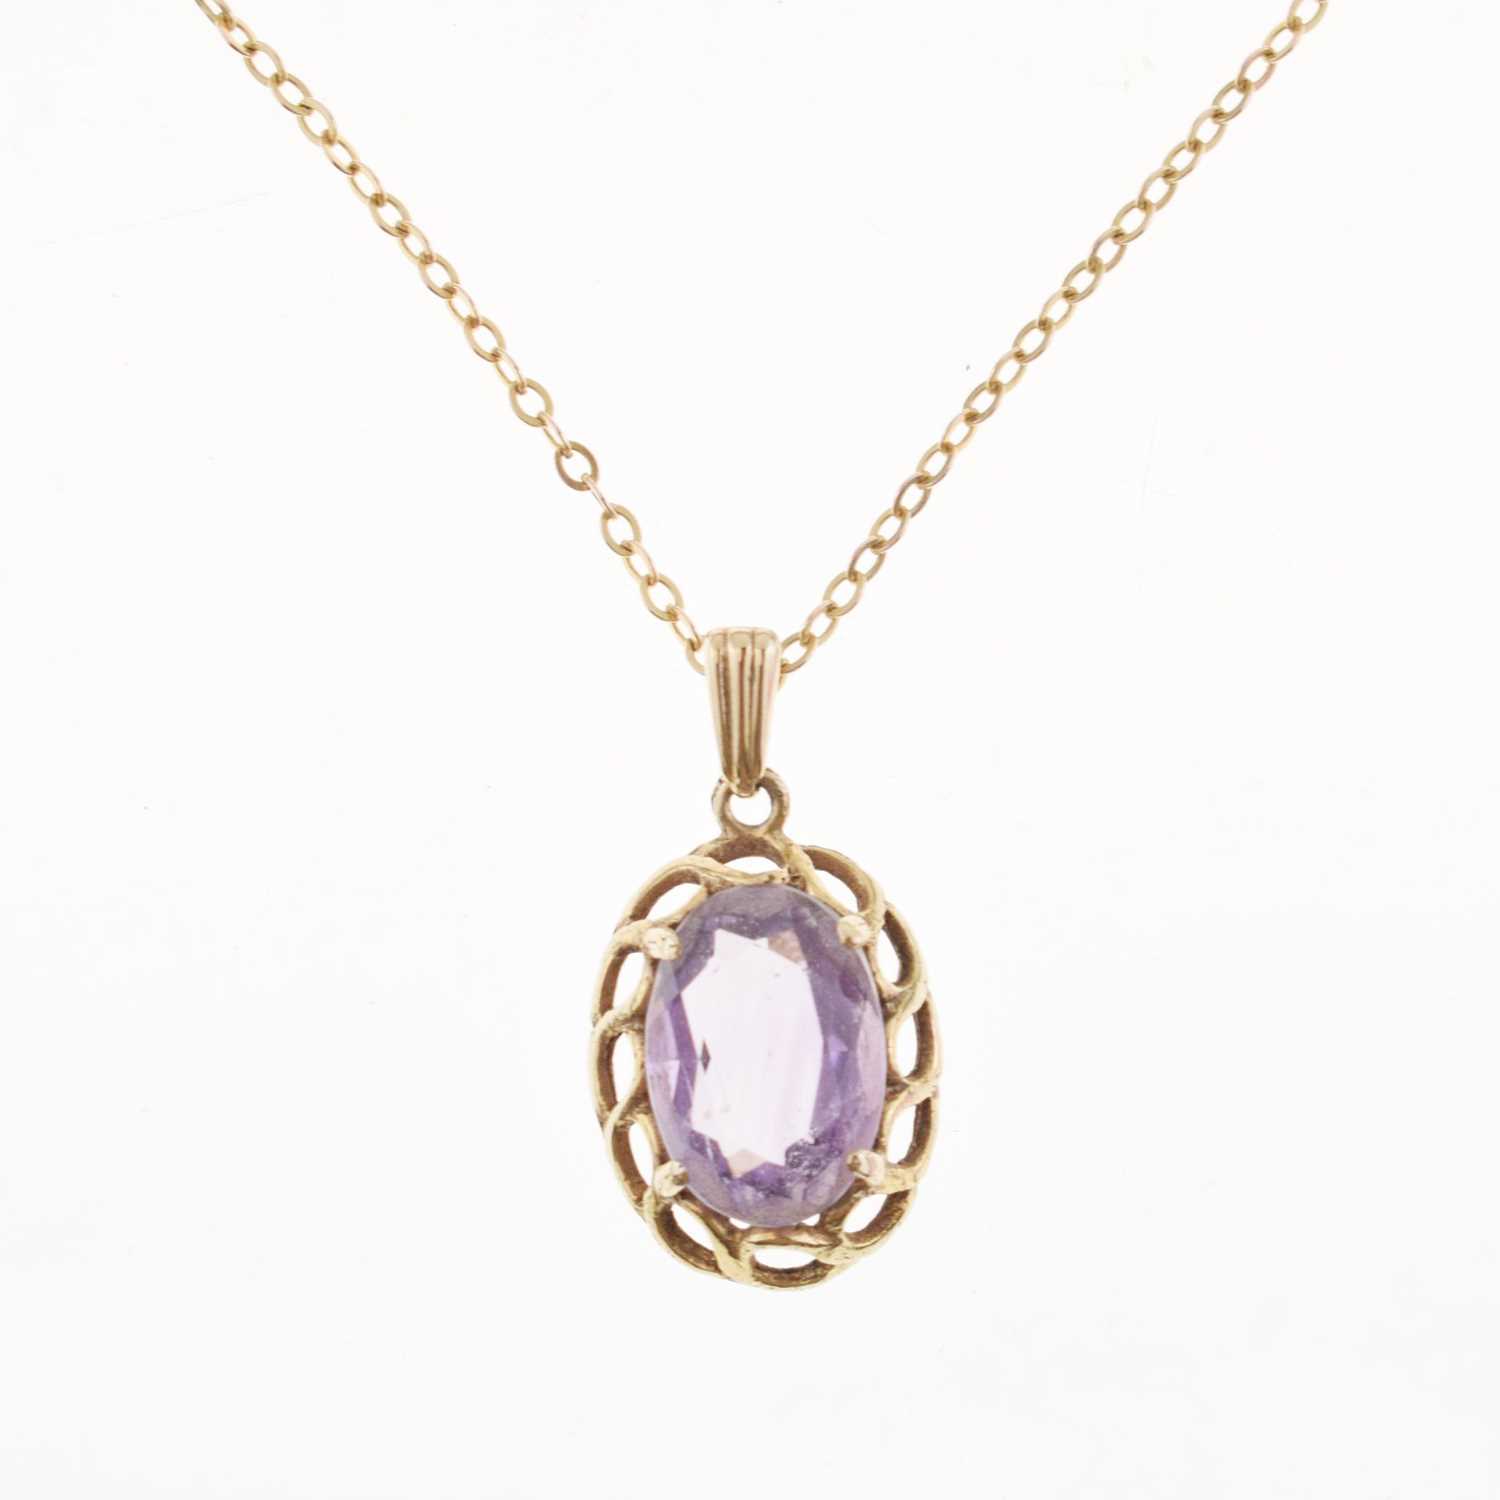 Lot 39 - Amethyst coloured pendant and necklace